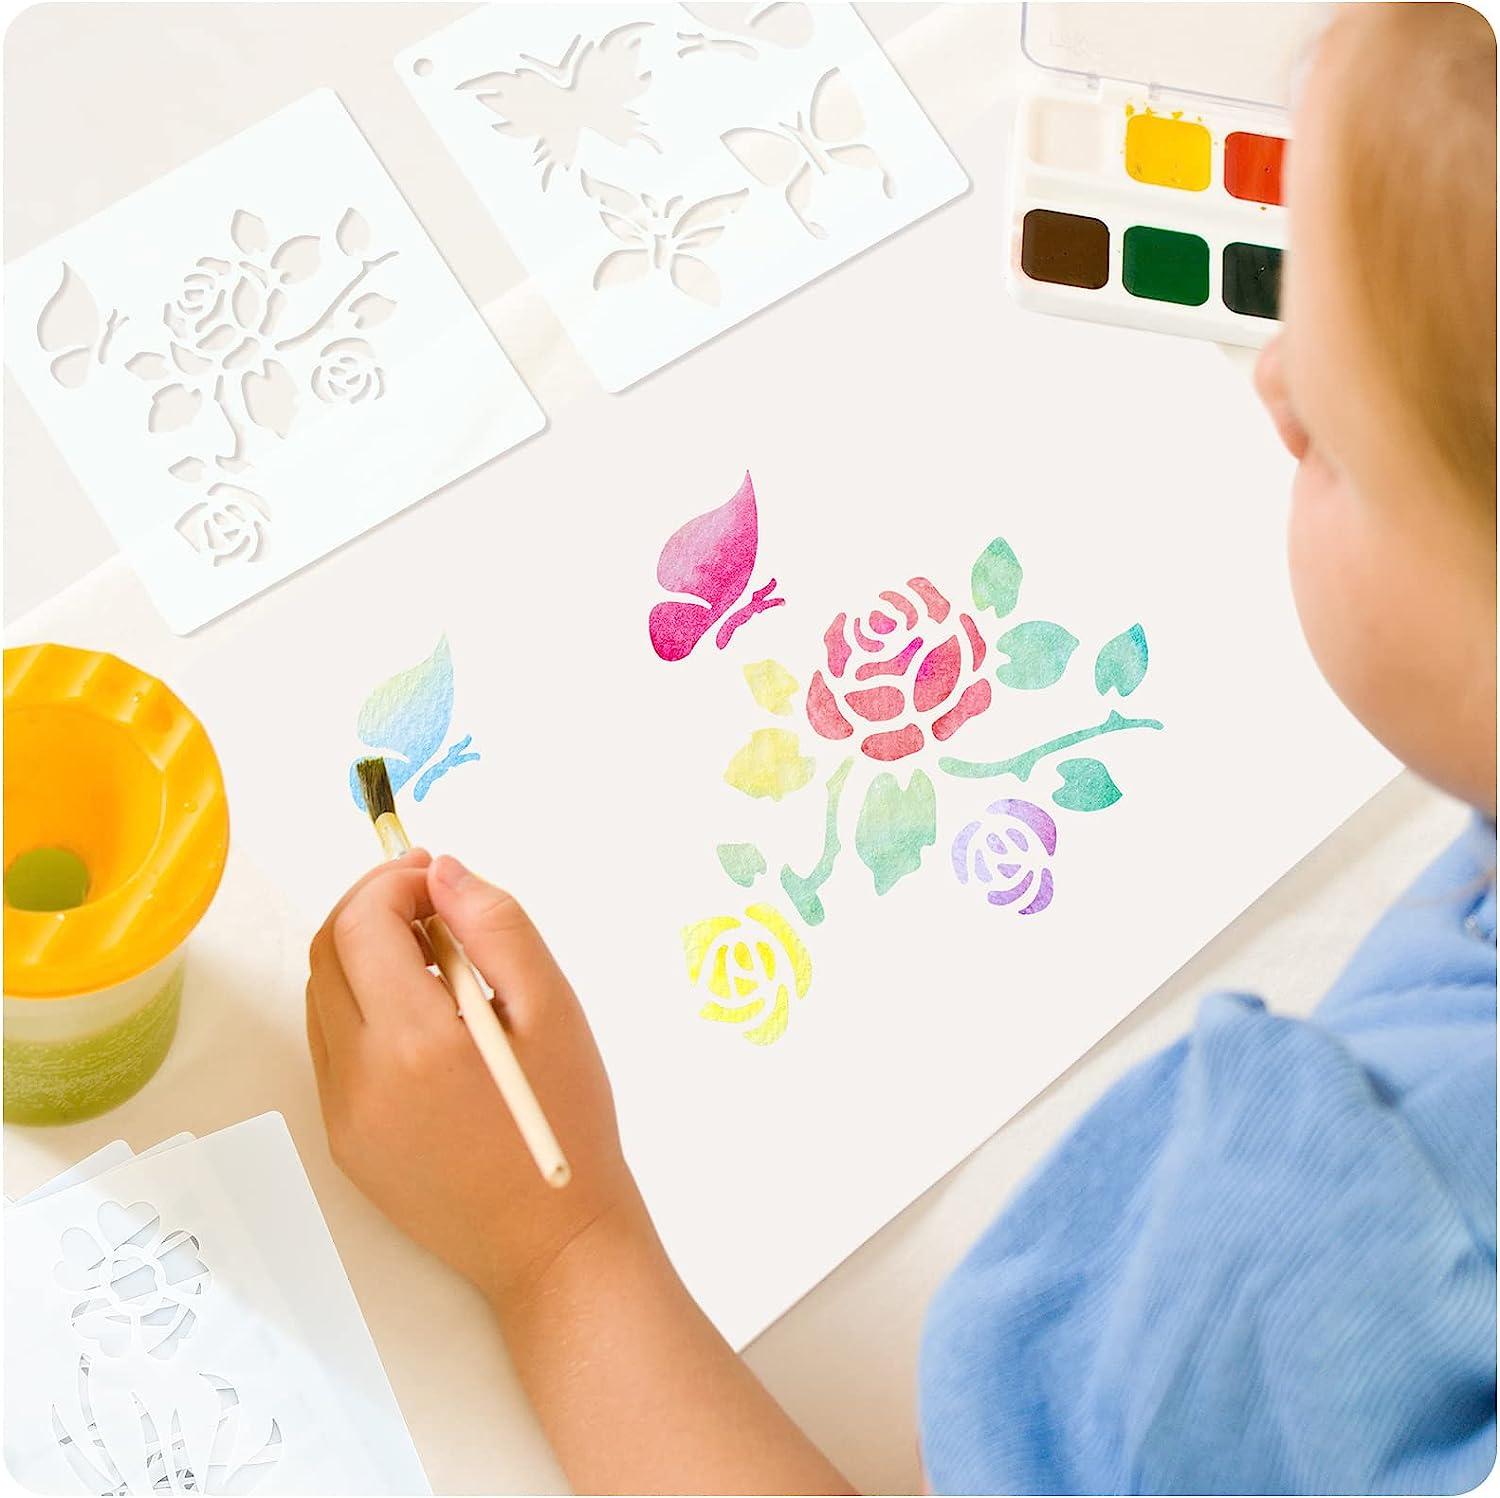 60 Pieces Farm Style Stencils for Painting Reusable Small Stencils for Kids  DIY Drawing Crafts Template Paint Stencils for Painting on Wood Wall Home